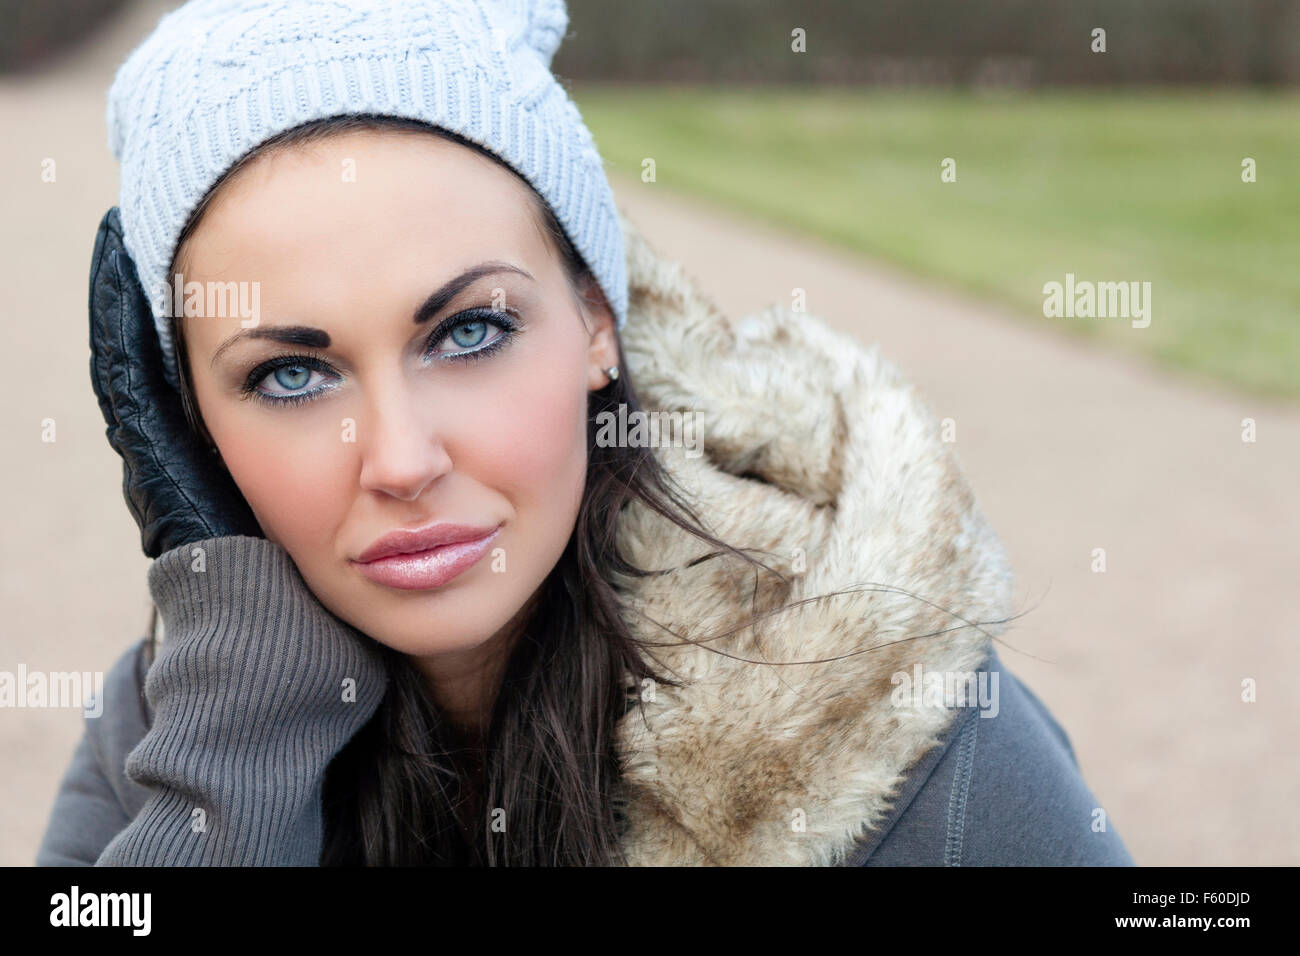 Outdoor portrait of beautiful attractive young brunette woman in warm fur lined winter jacket or coat gloves and hat looking at camera  Model Release: Yes.  Property release: No. Stock Photo